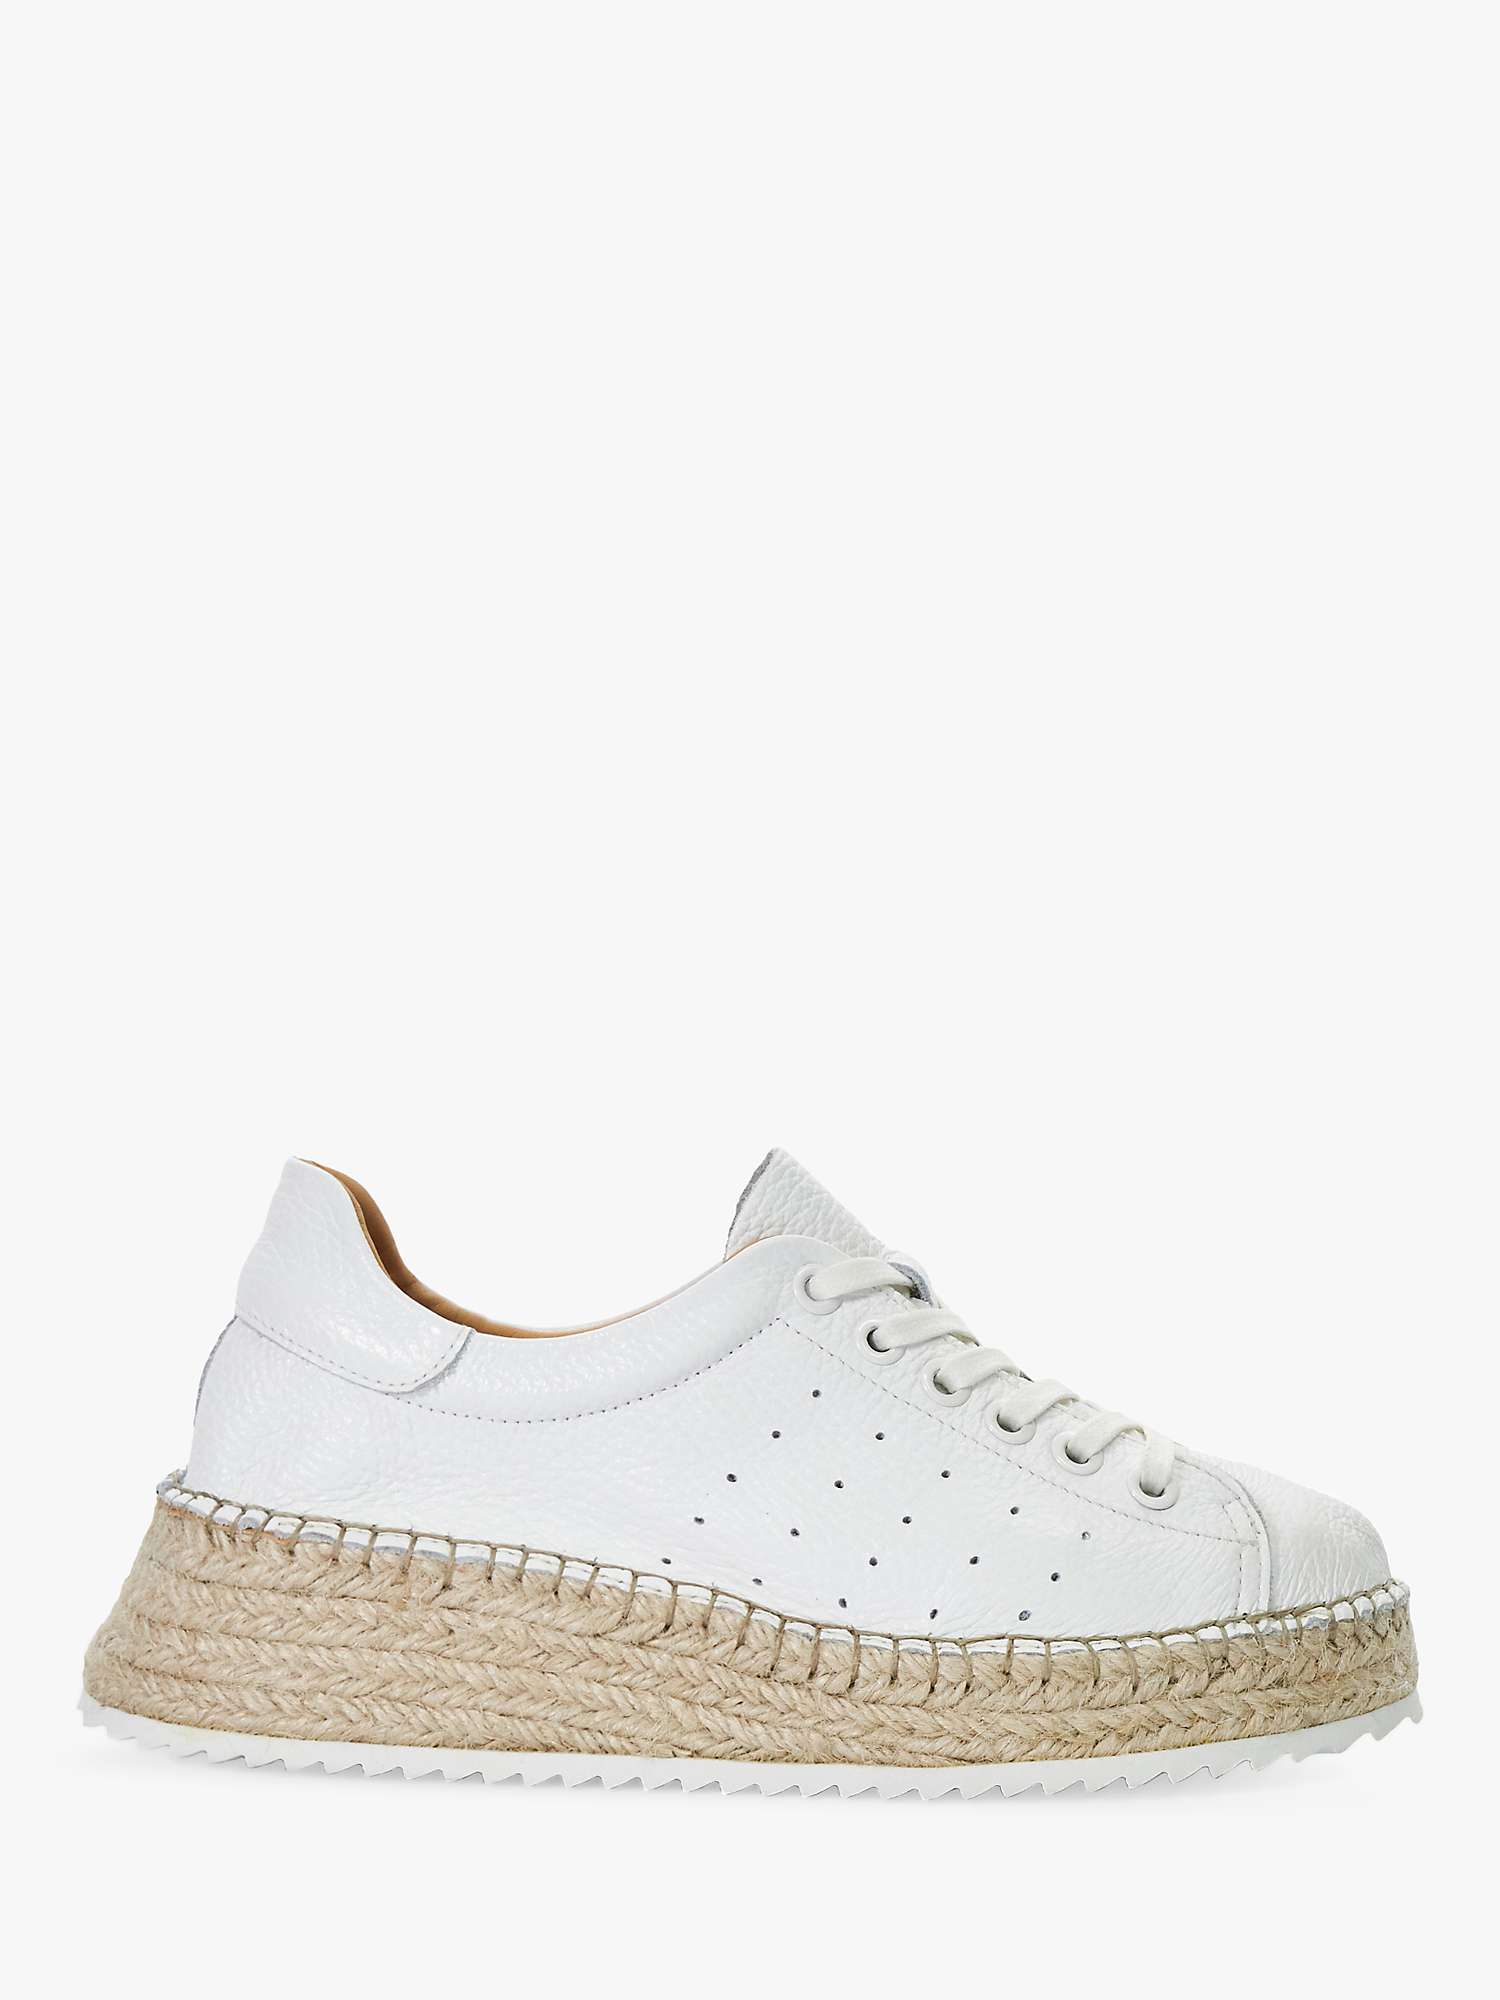 Buy Dune Explainedd Leather Lace-Up Wedge Espadrille Shoes Online at johnlewis.com